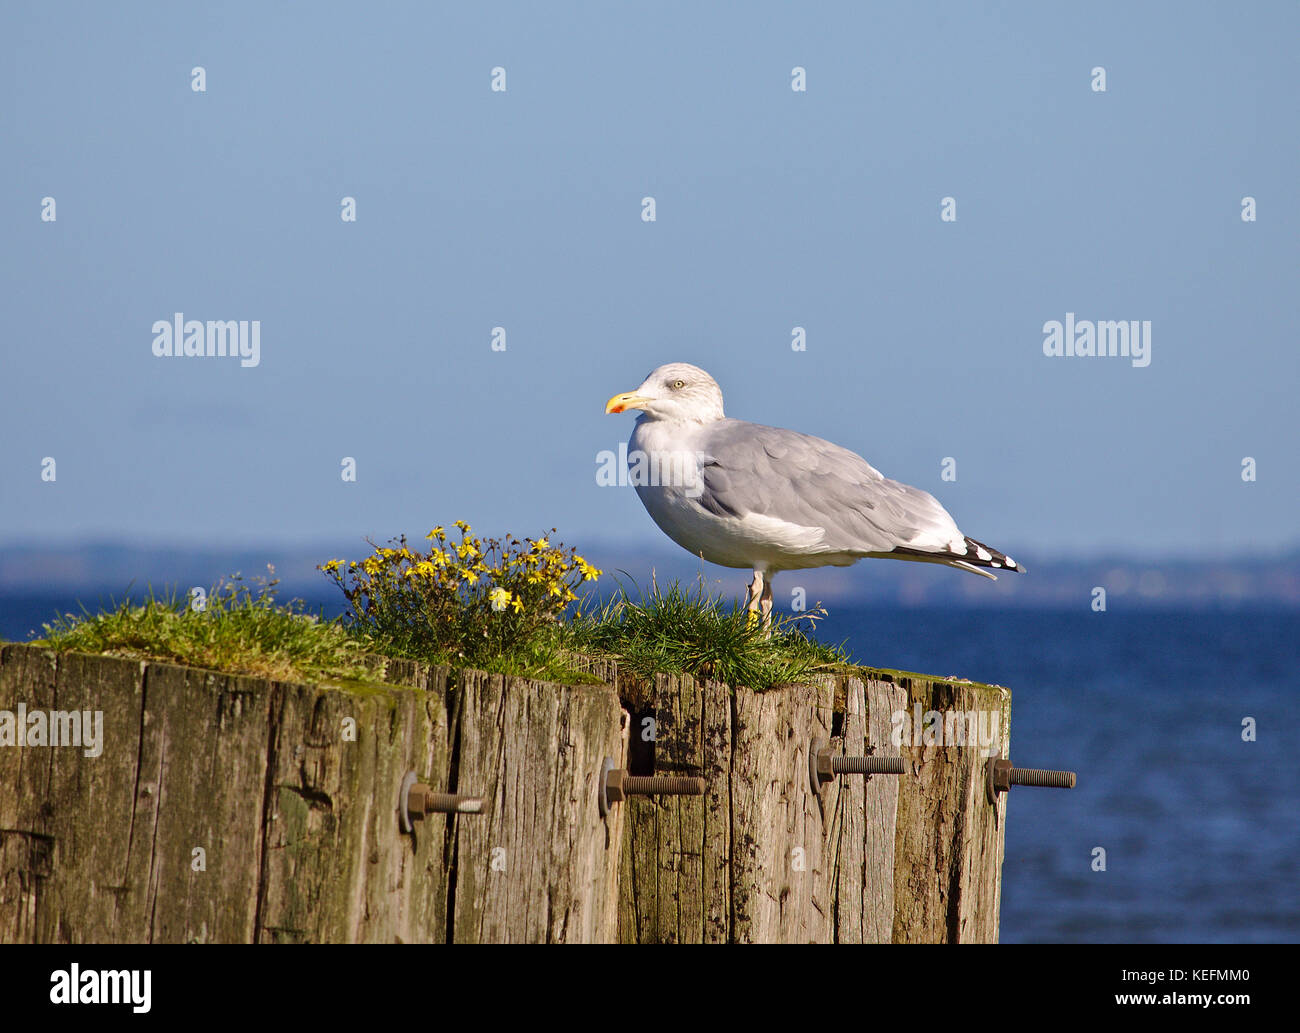 Adult herring gull sitting on old wooden mooring post overgrown with grass and yellow flowers with the blue sea in the background Stock Photo